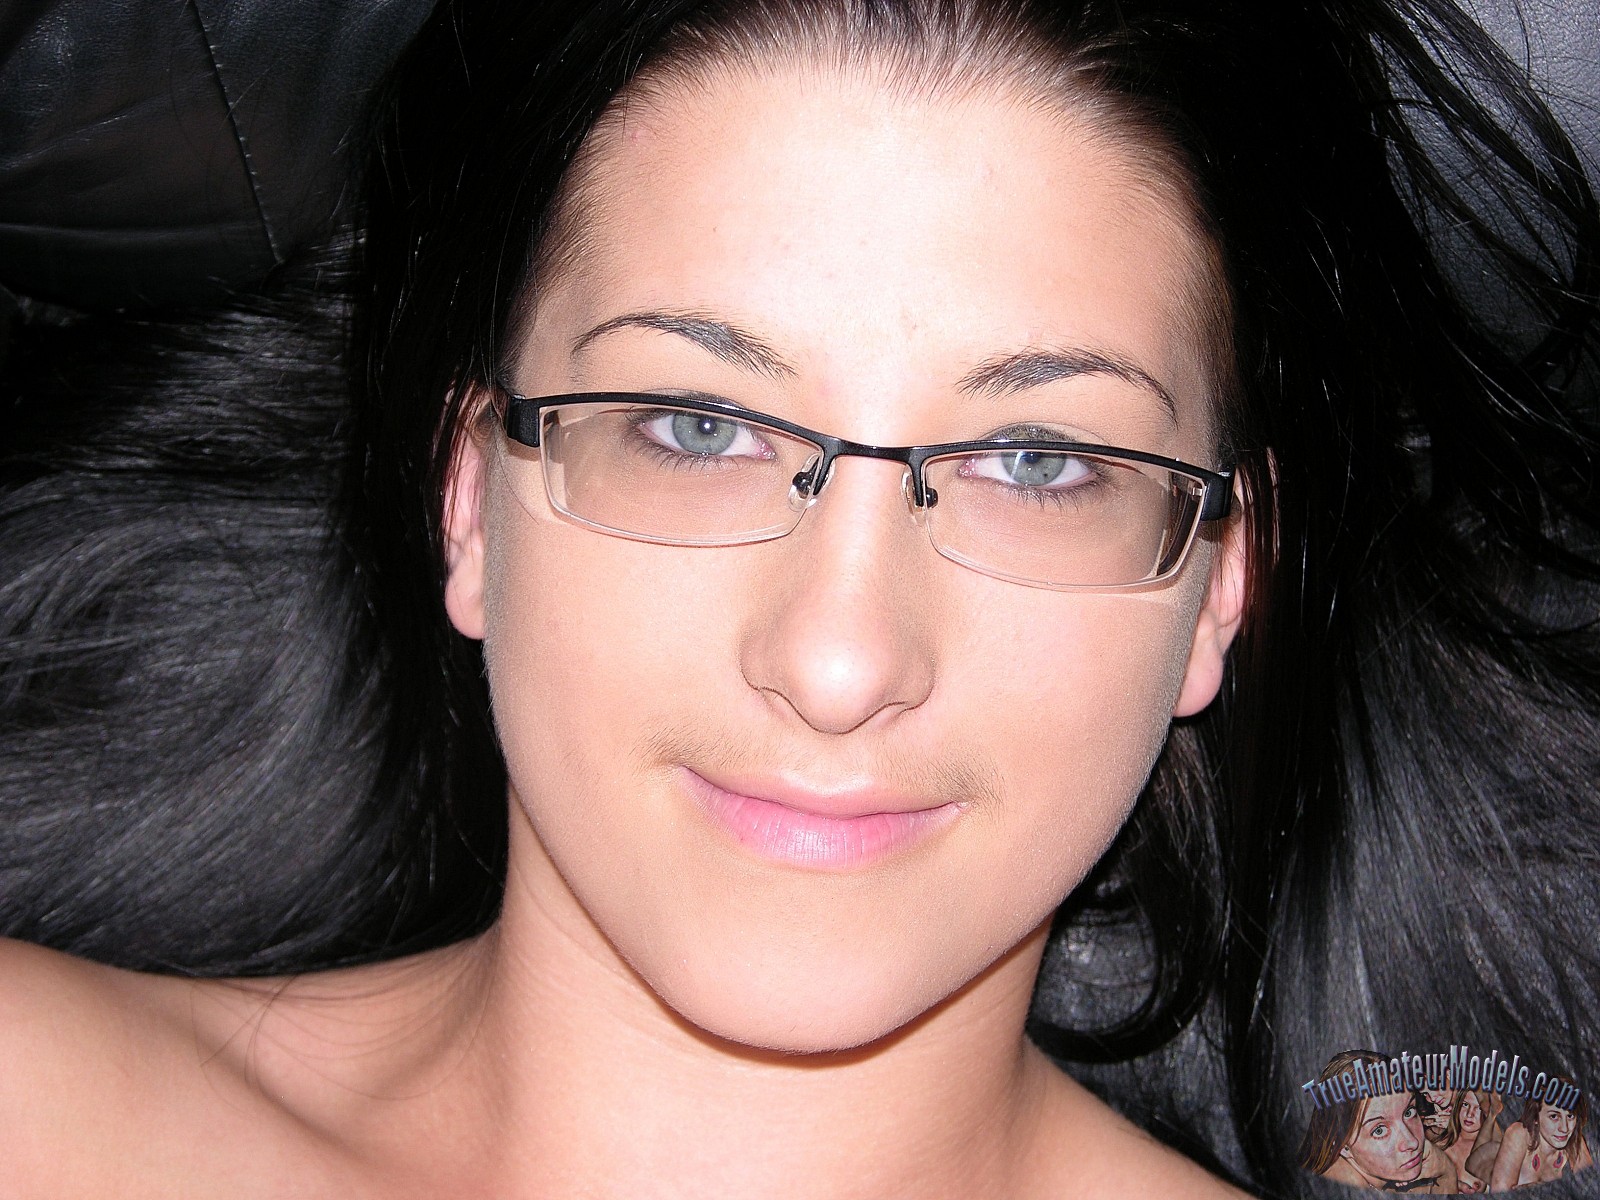 Sexy Girls wearing Glasses Page 286 Freeones Forum photo image image